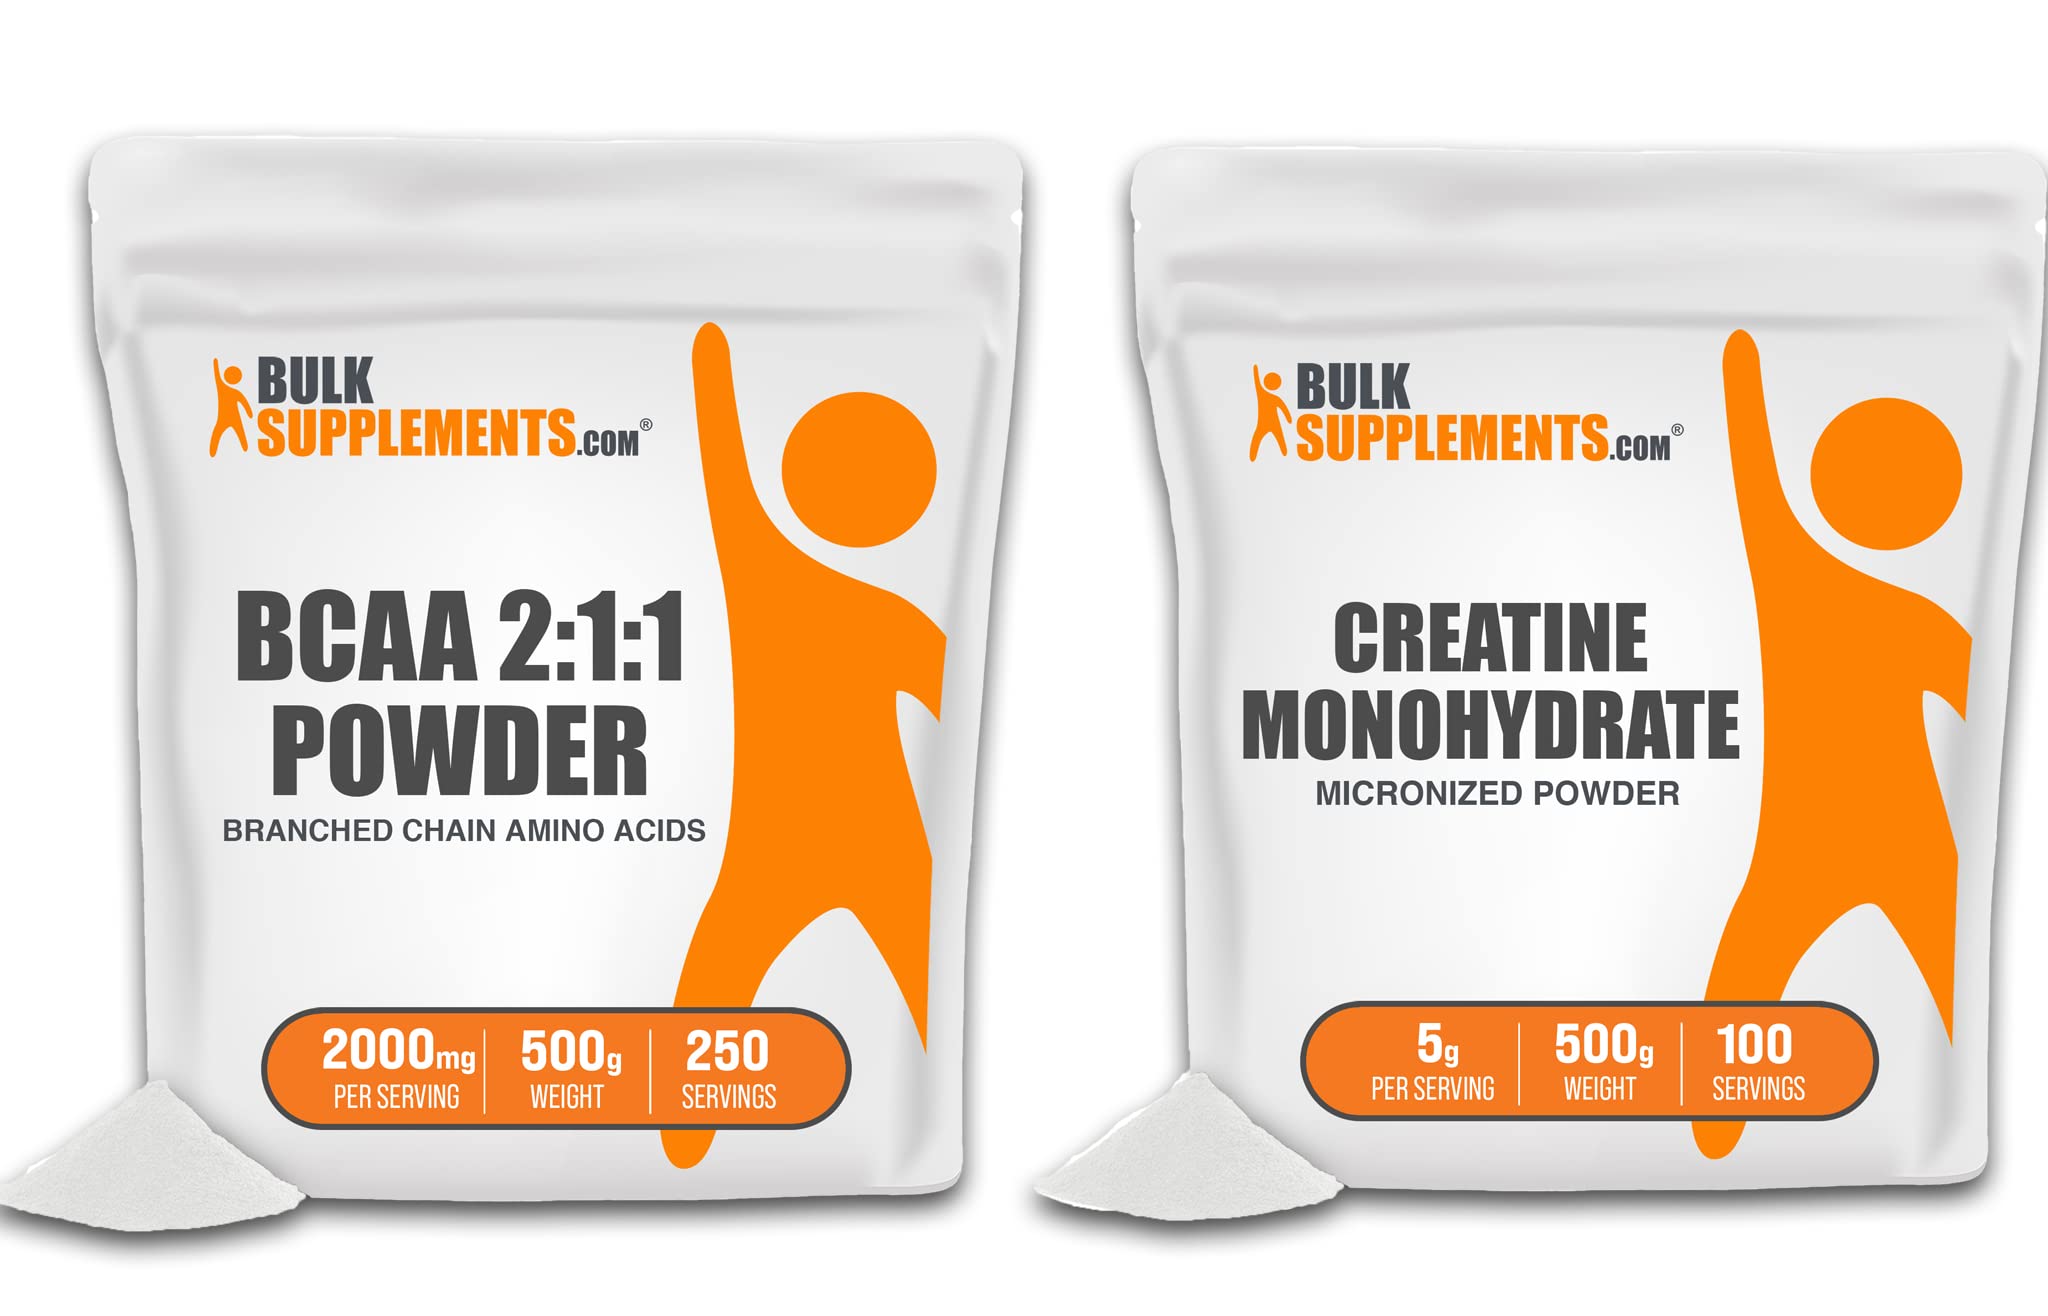 BULKSUPPLEMENTS.COM BCAA 2:1:1 Powder, 500g, with Creatine Monohydrate Powder (Micronized), 500g - Gluten Free, Soy Free, No Fillers Bundle